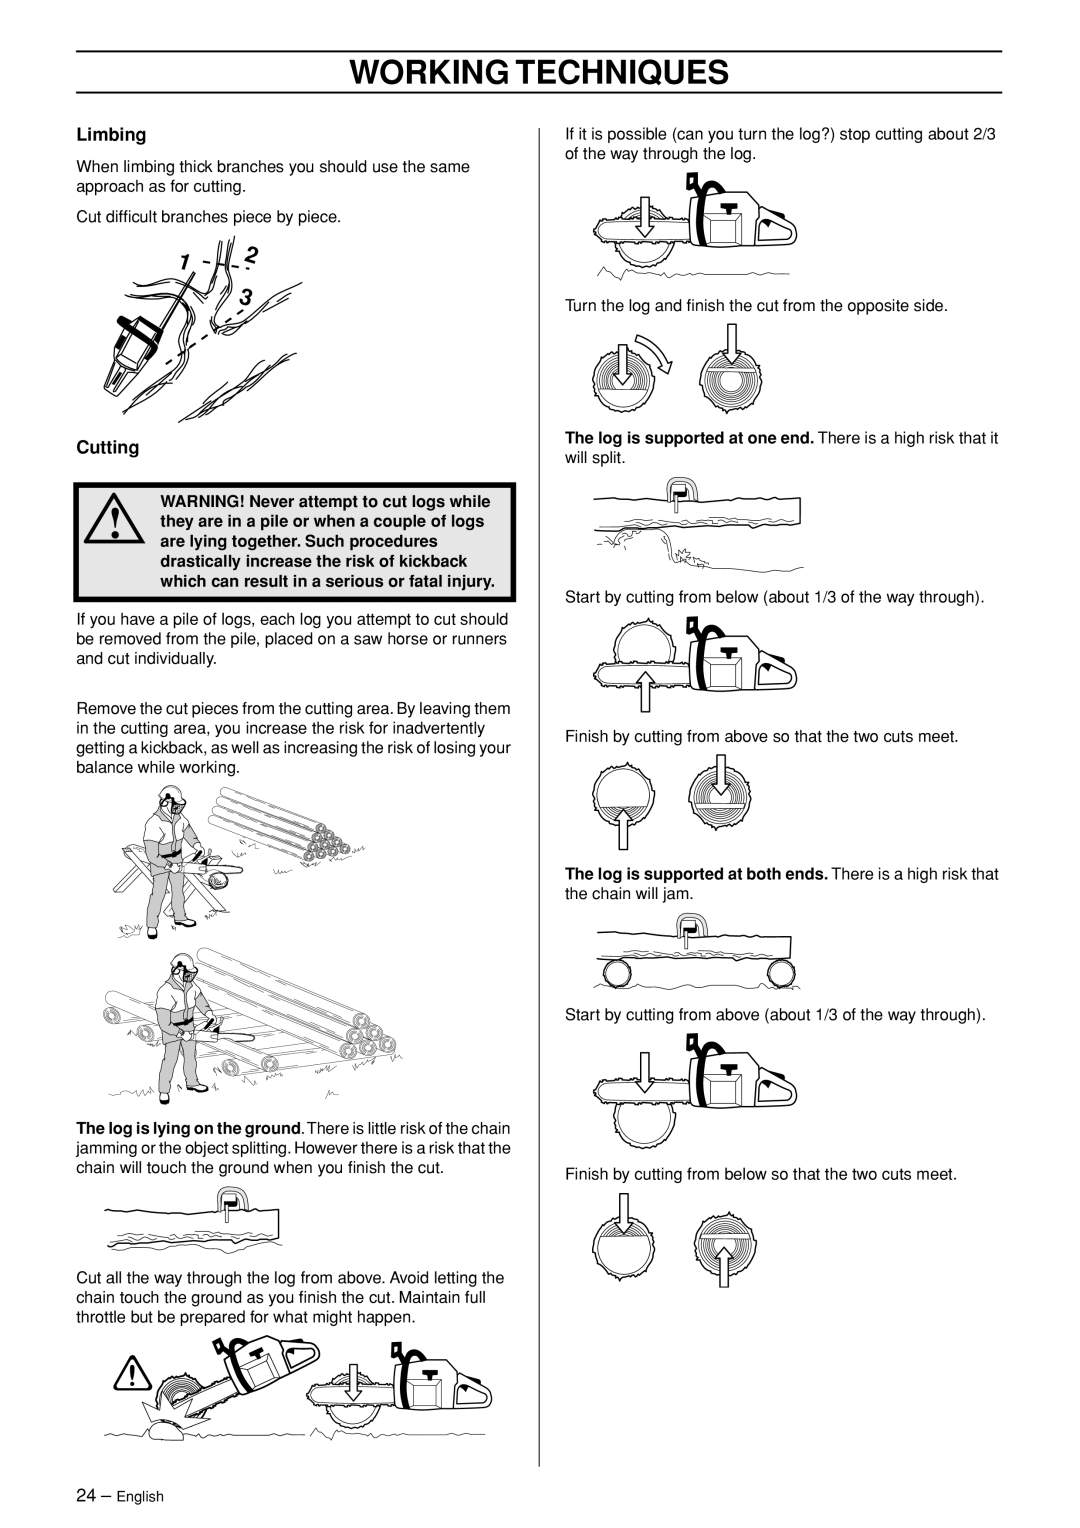 Husqvarna 336 manual Limbing, Cutting, WARNING! Never attempt to cut logs while, Working Techniques 